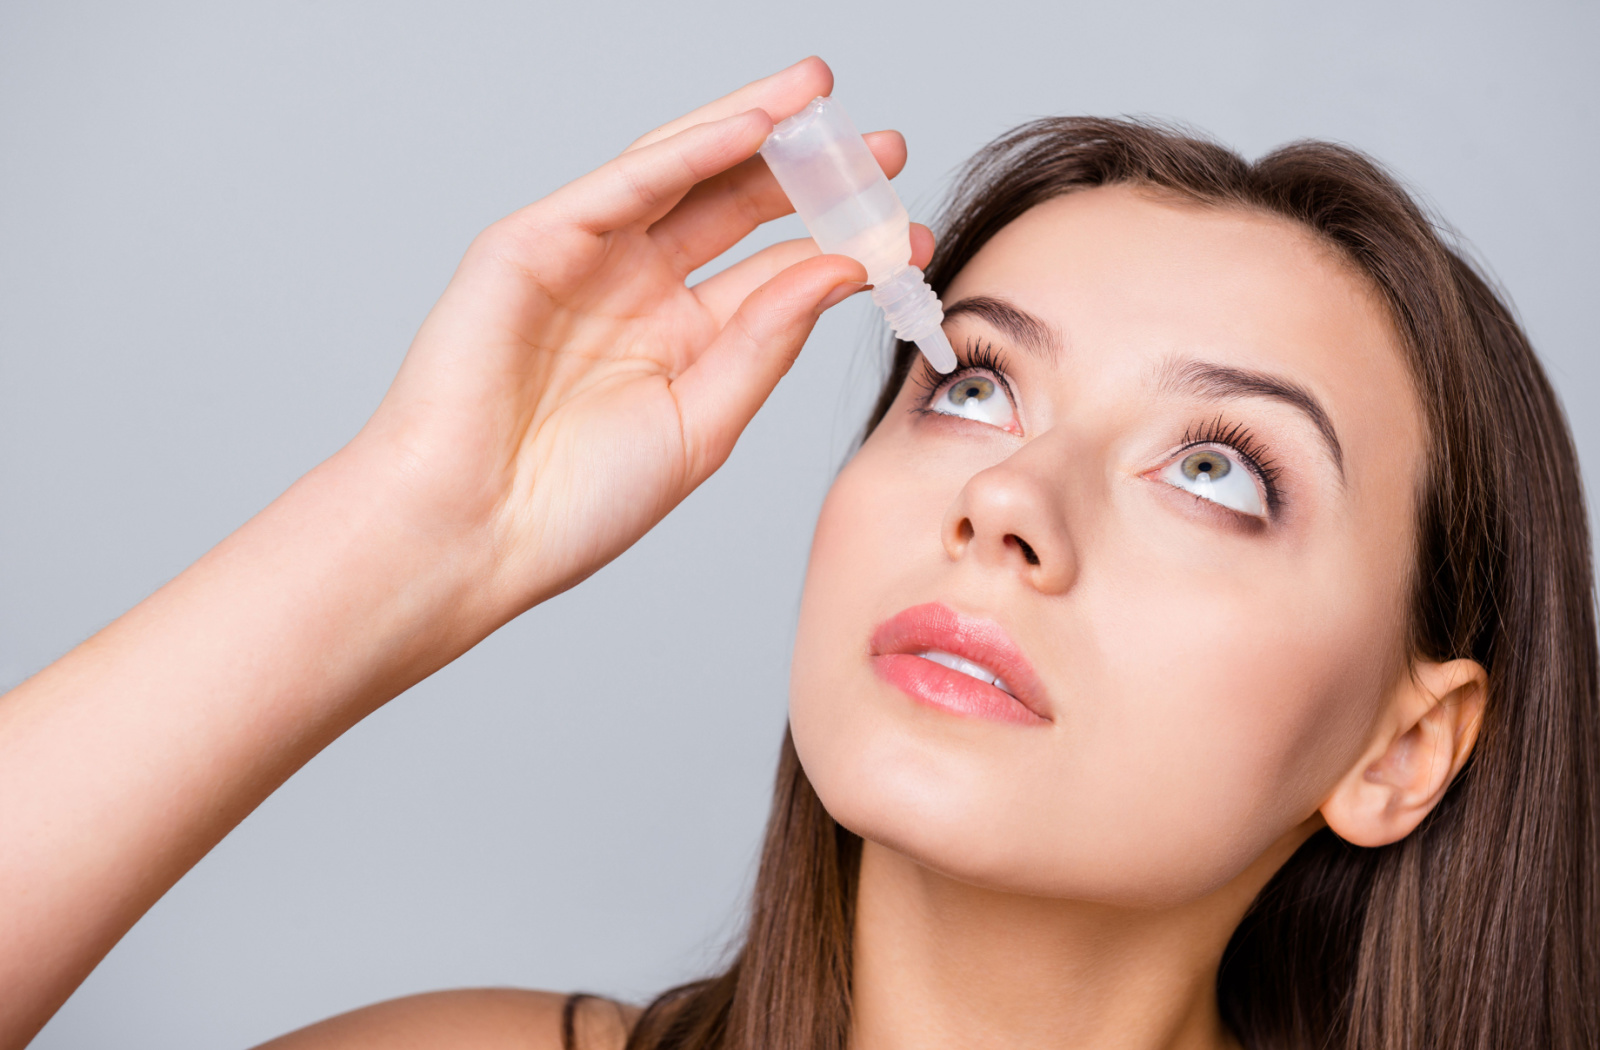 A woman holding a small bottle of eye drops in her right hand and putting them on her right eye.